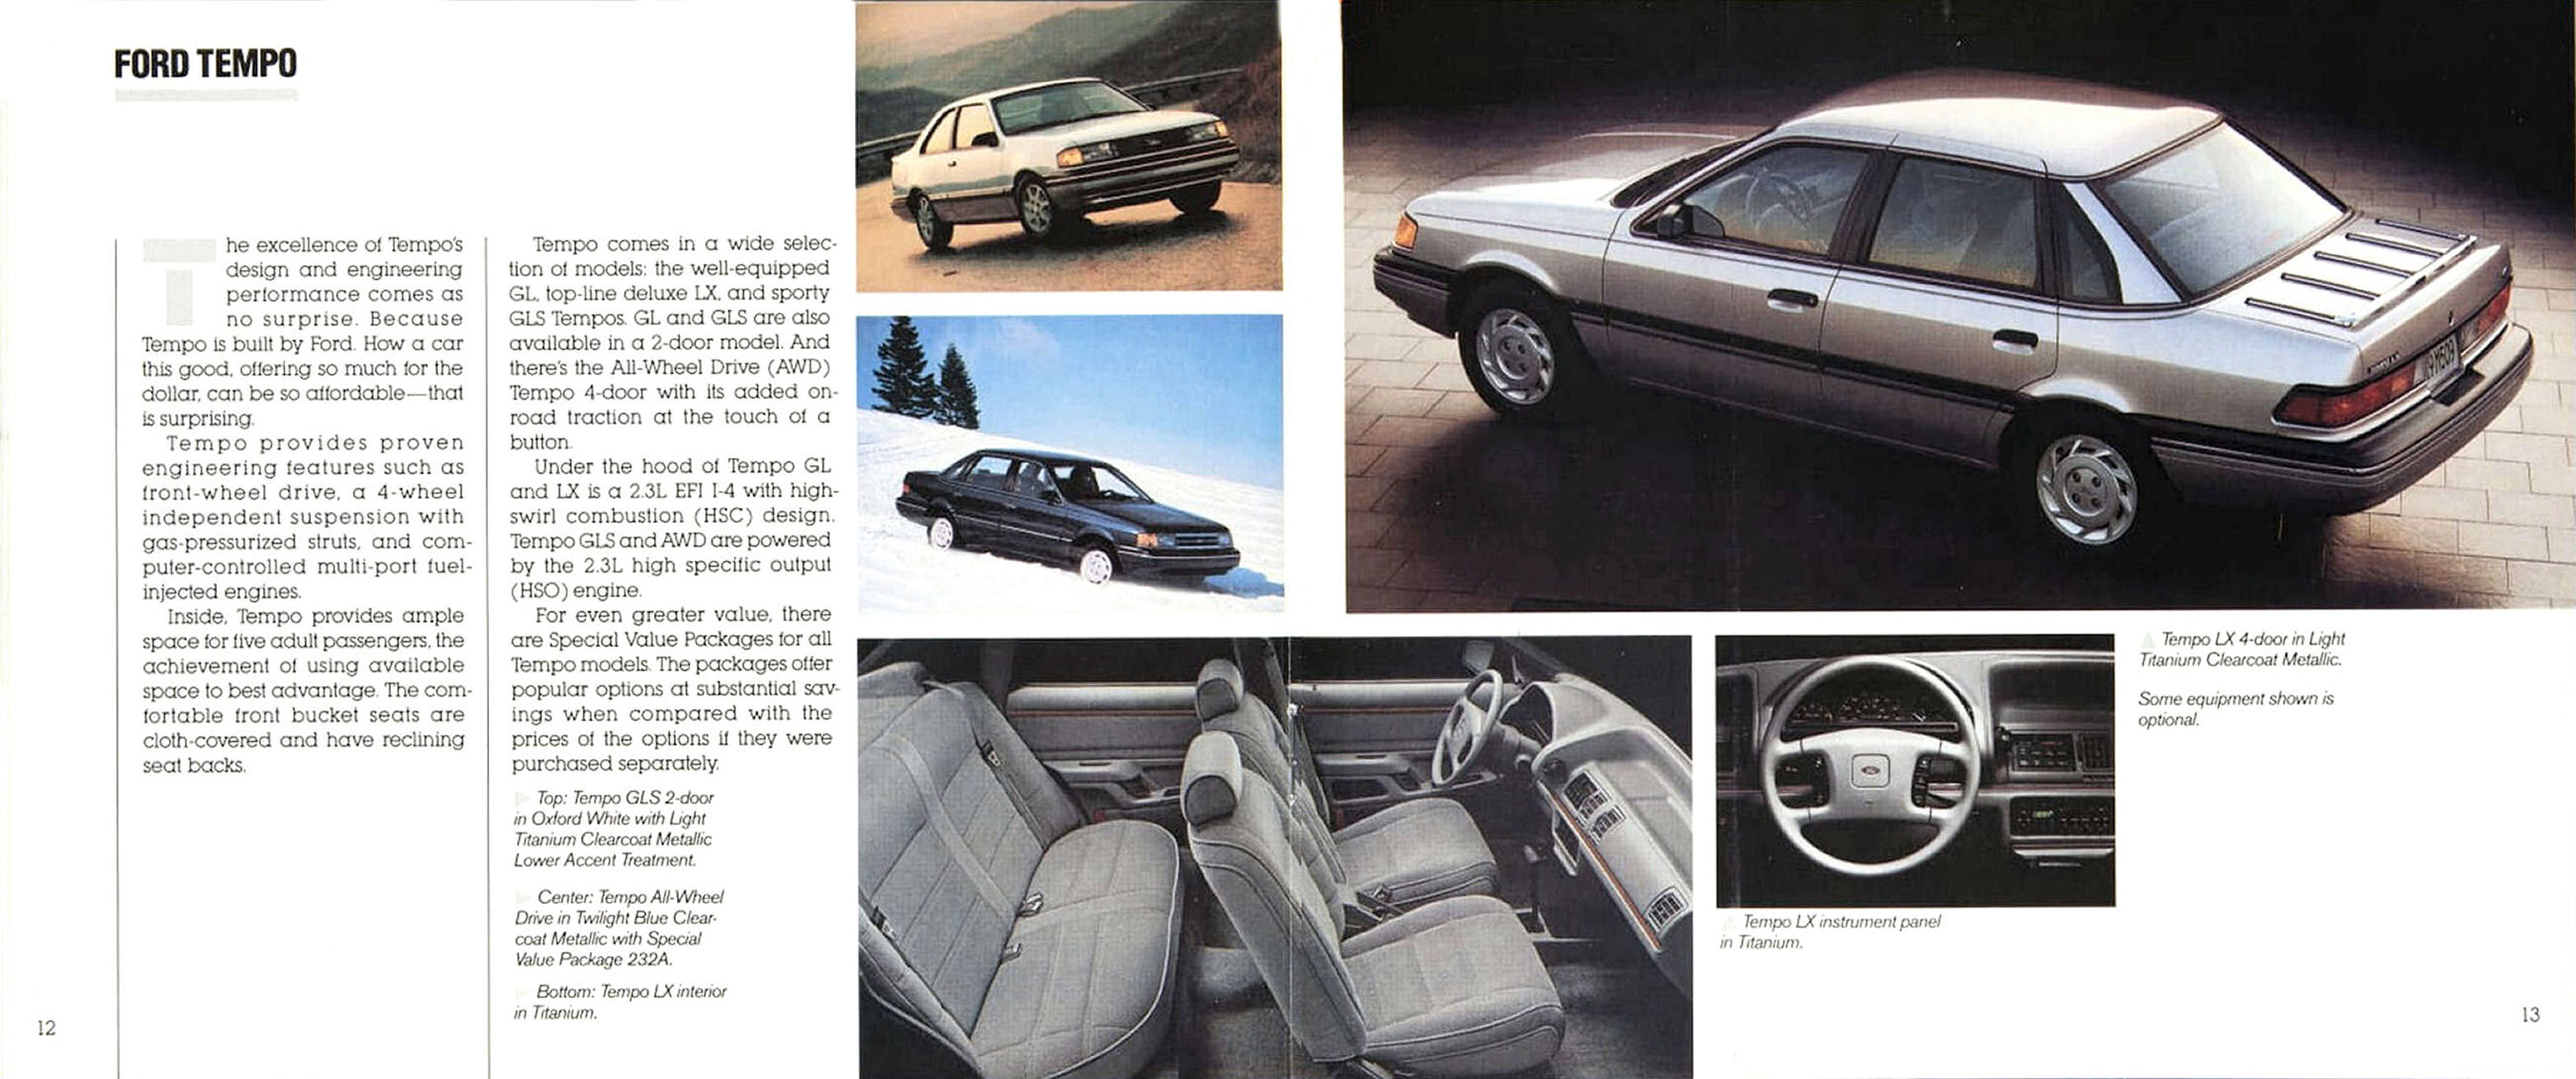 1990_Ford_Cars-12-13